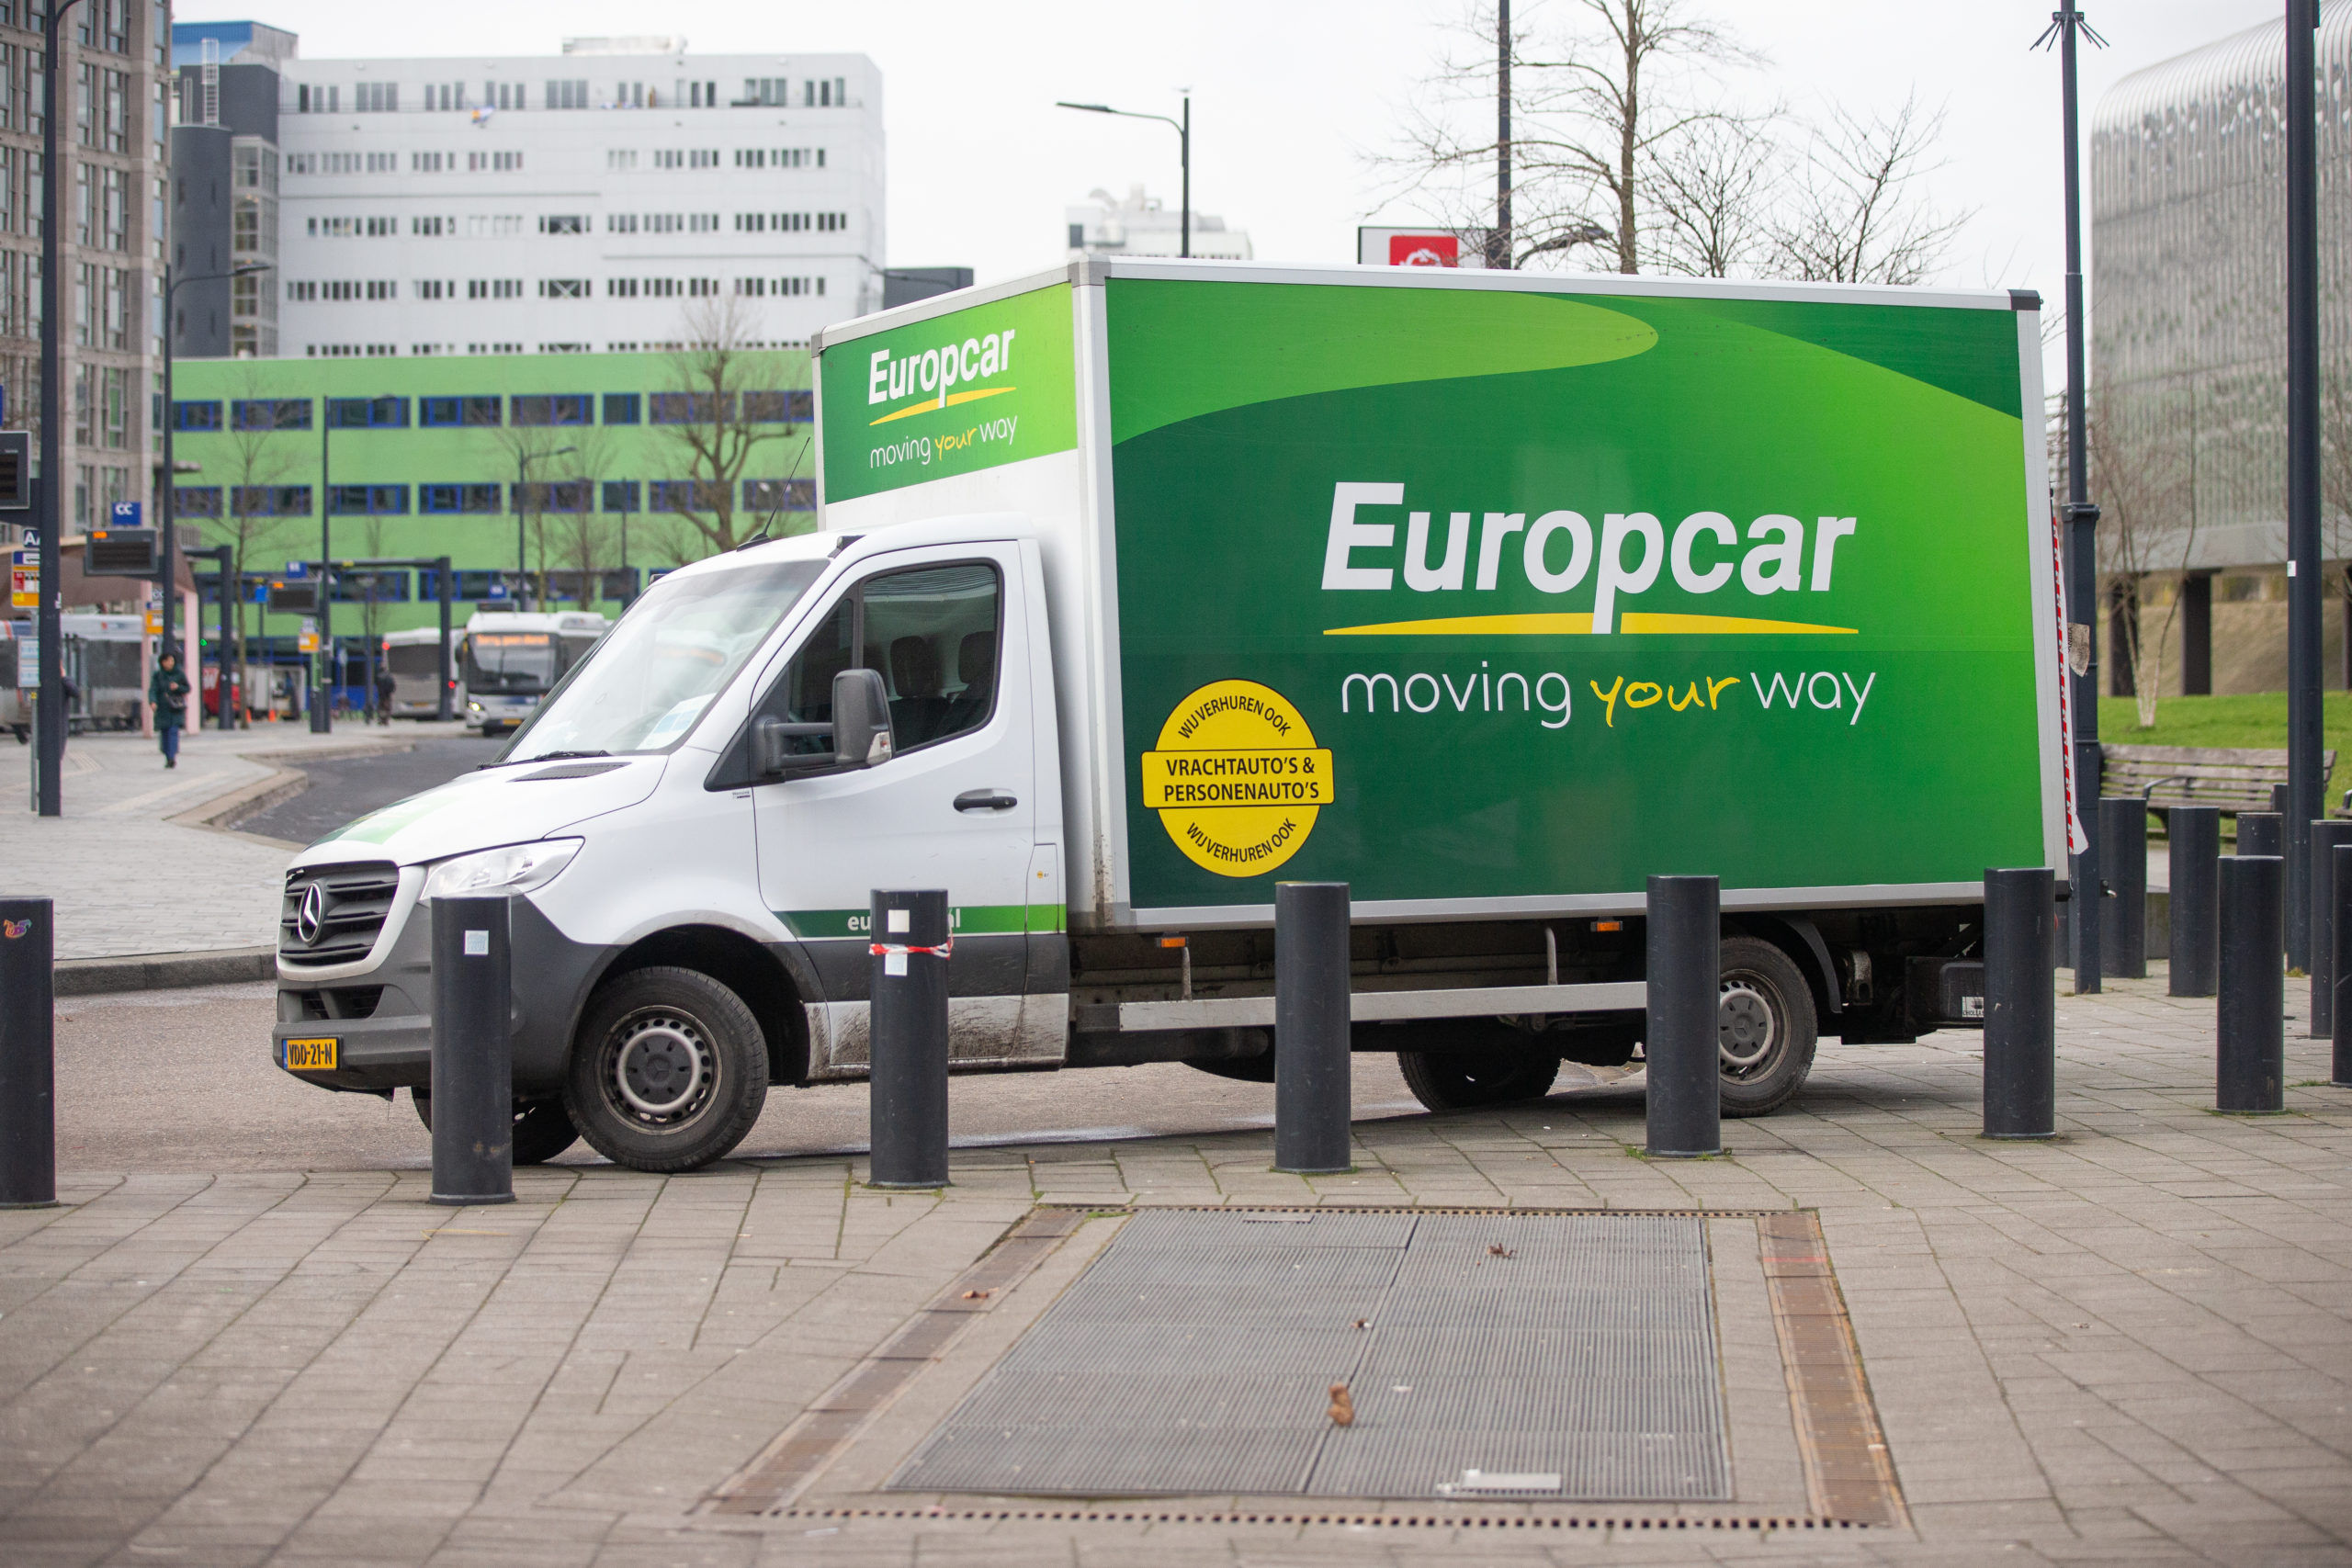 VW and Europcar go for second marriage